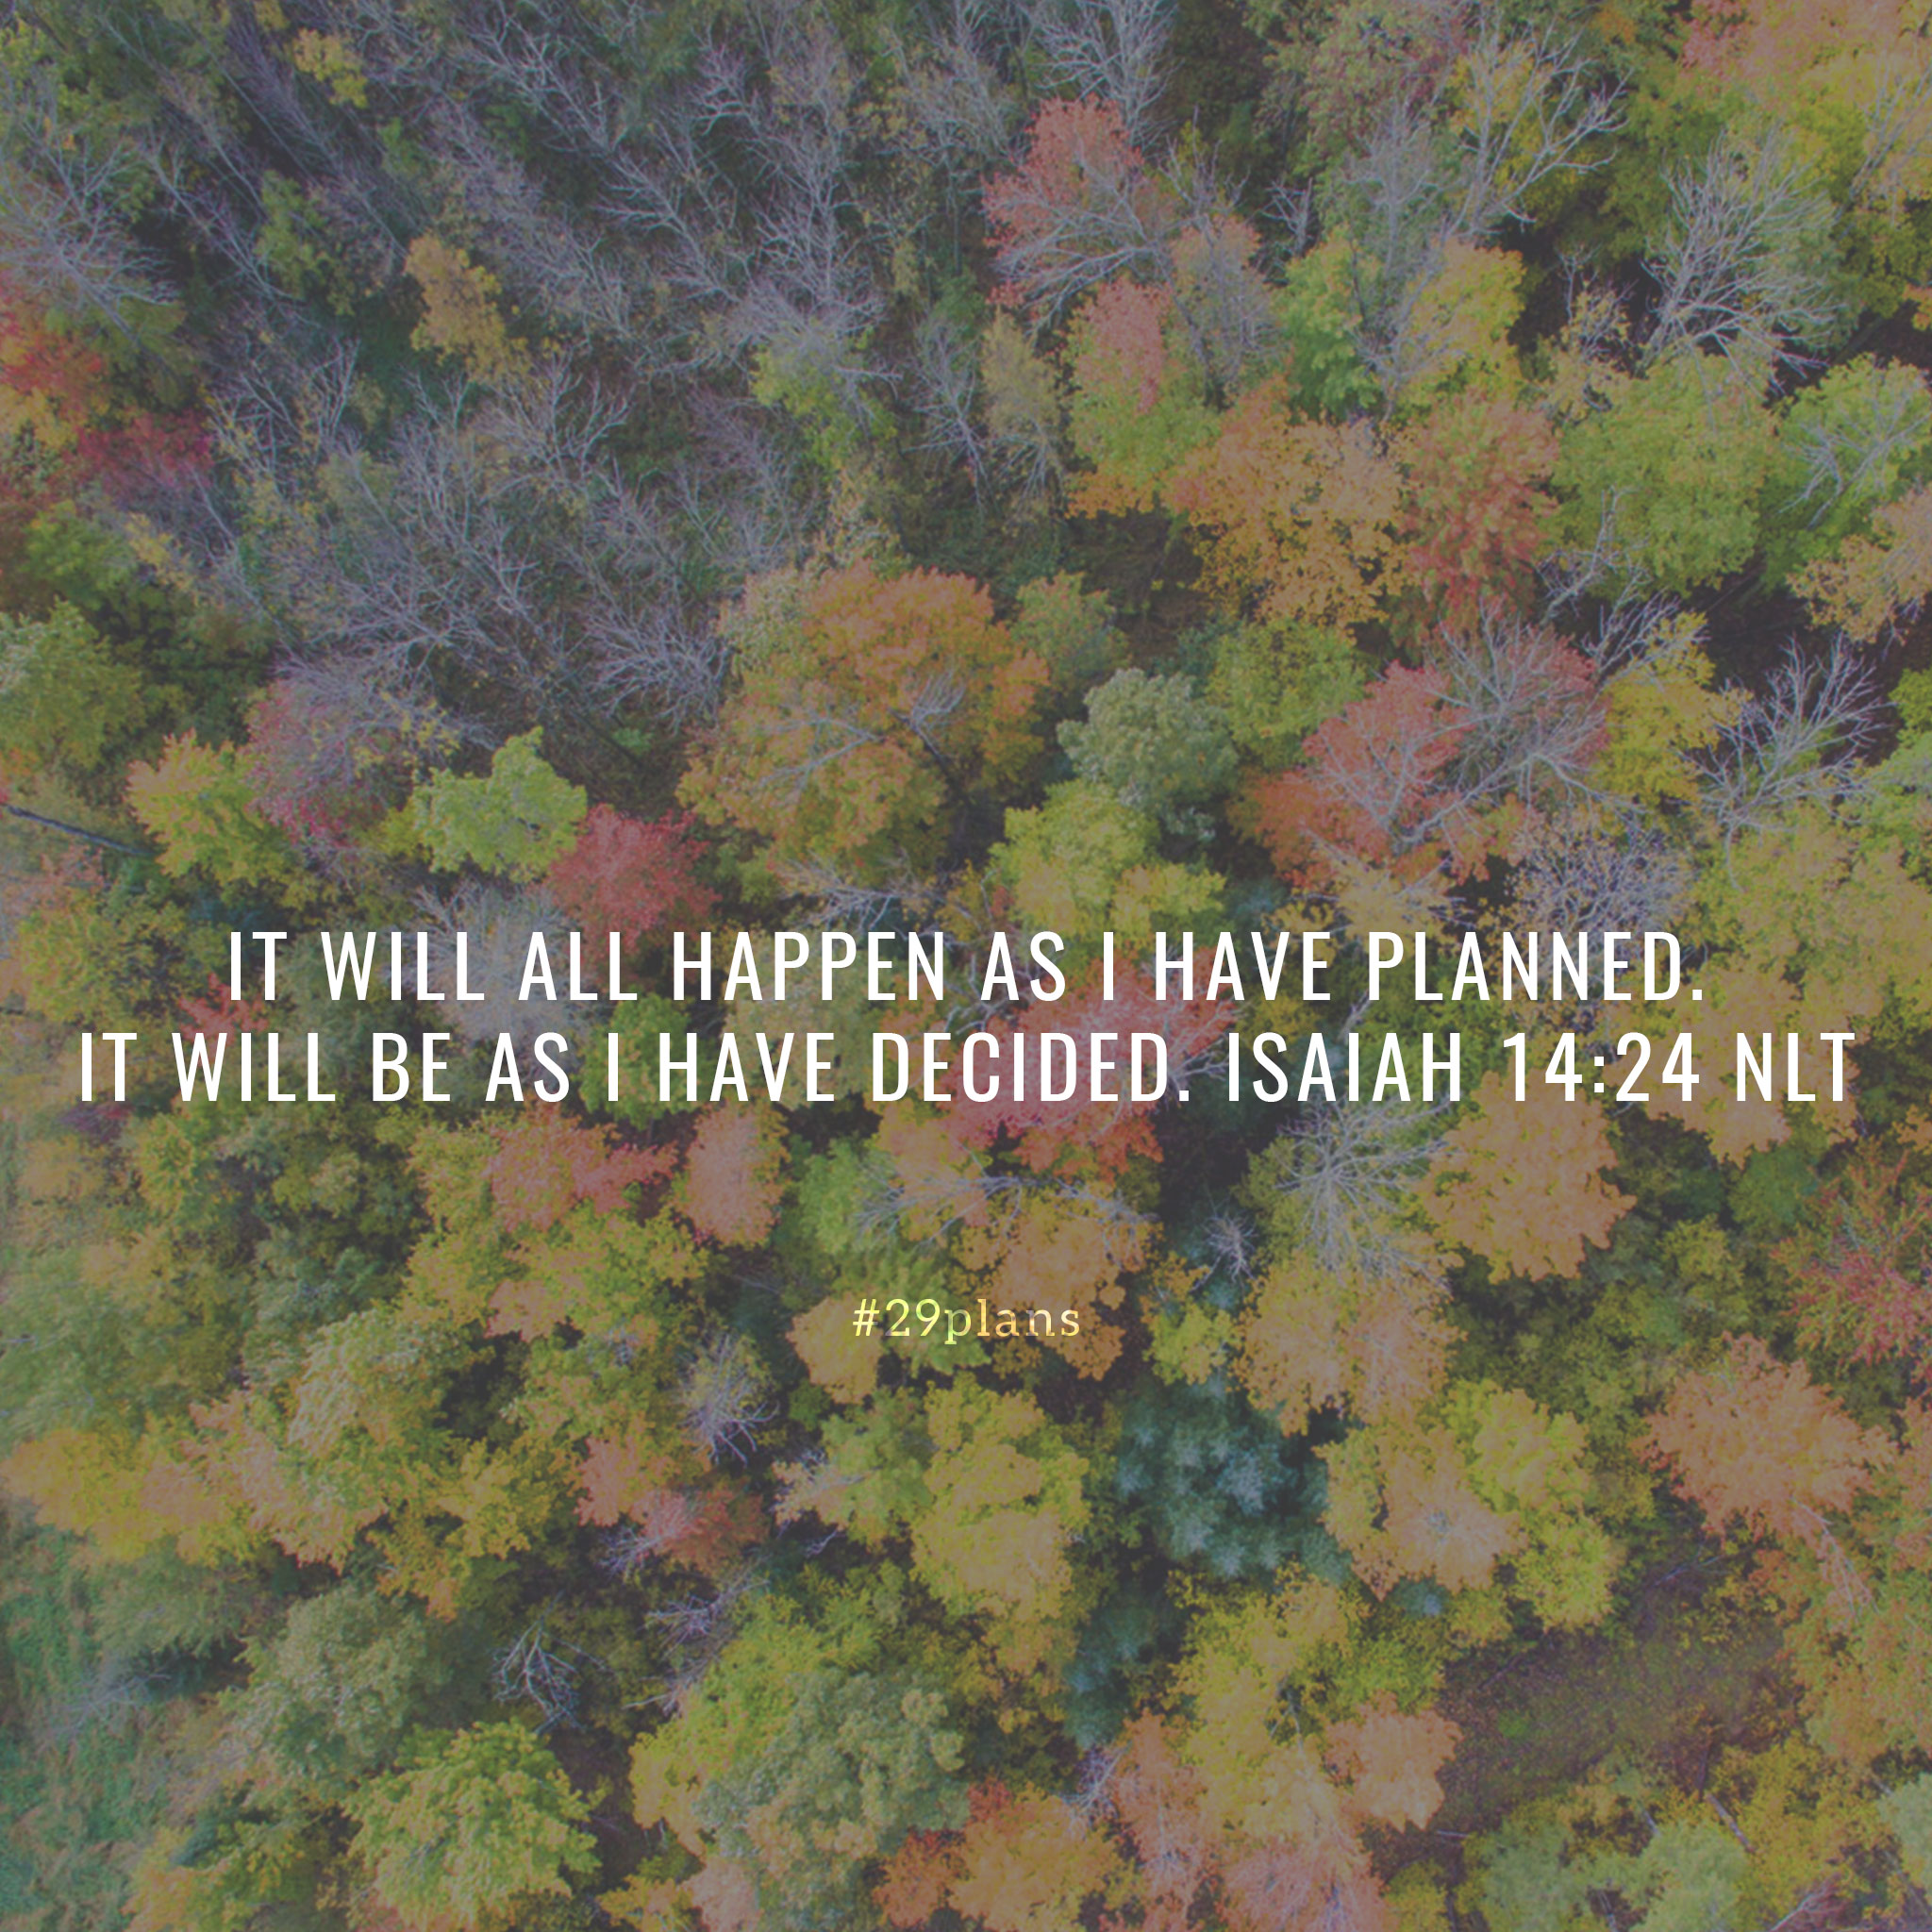 Today’s Guide — 10.21.18 — God’s plans